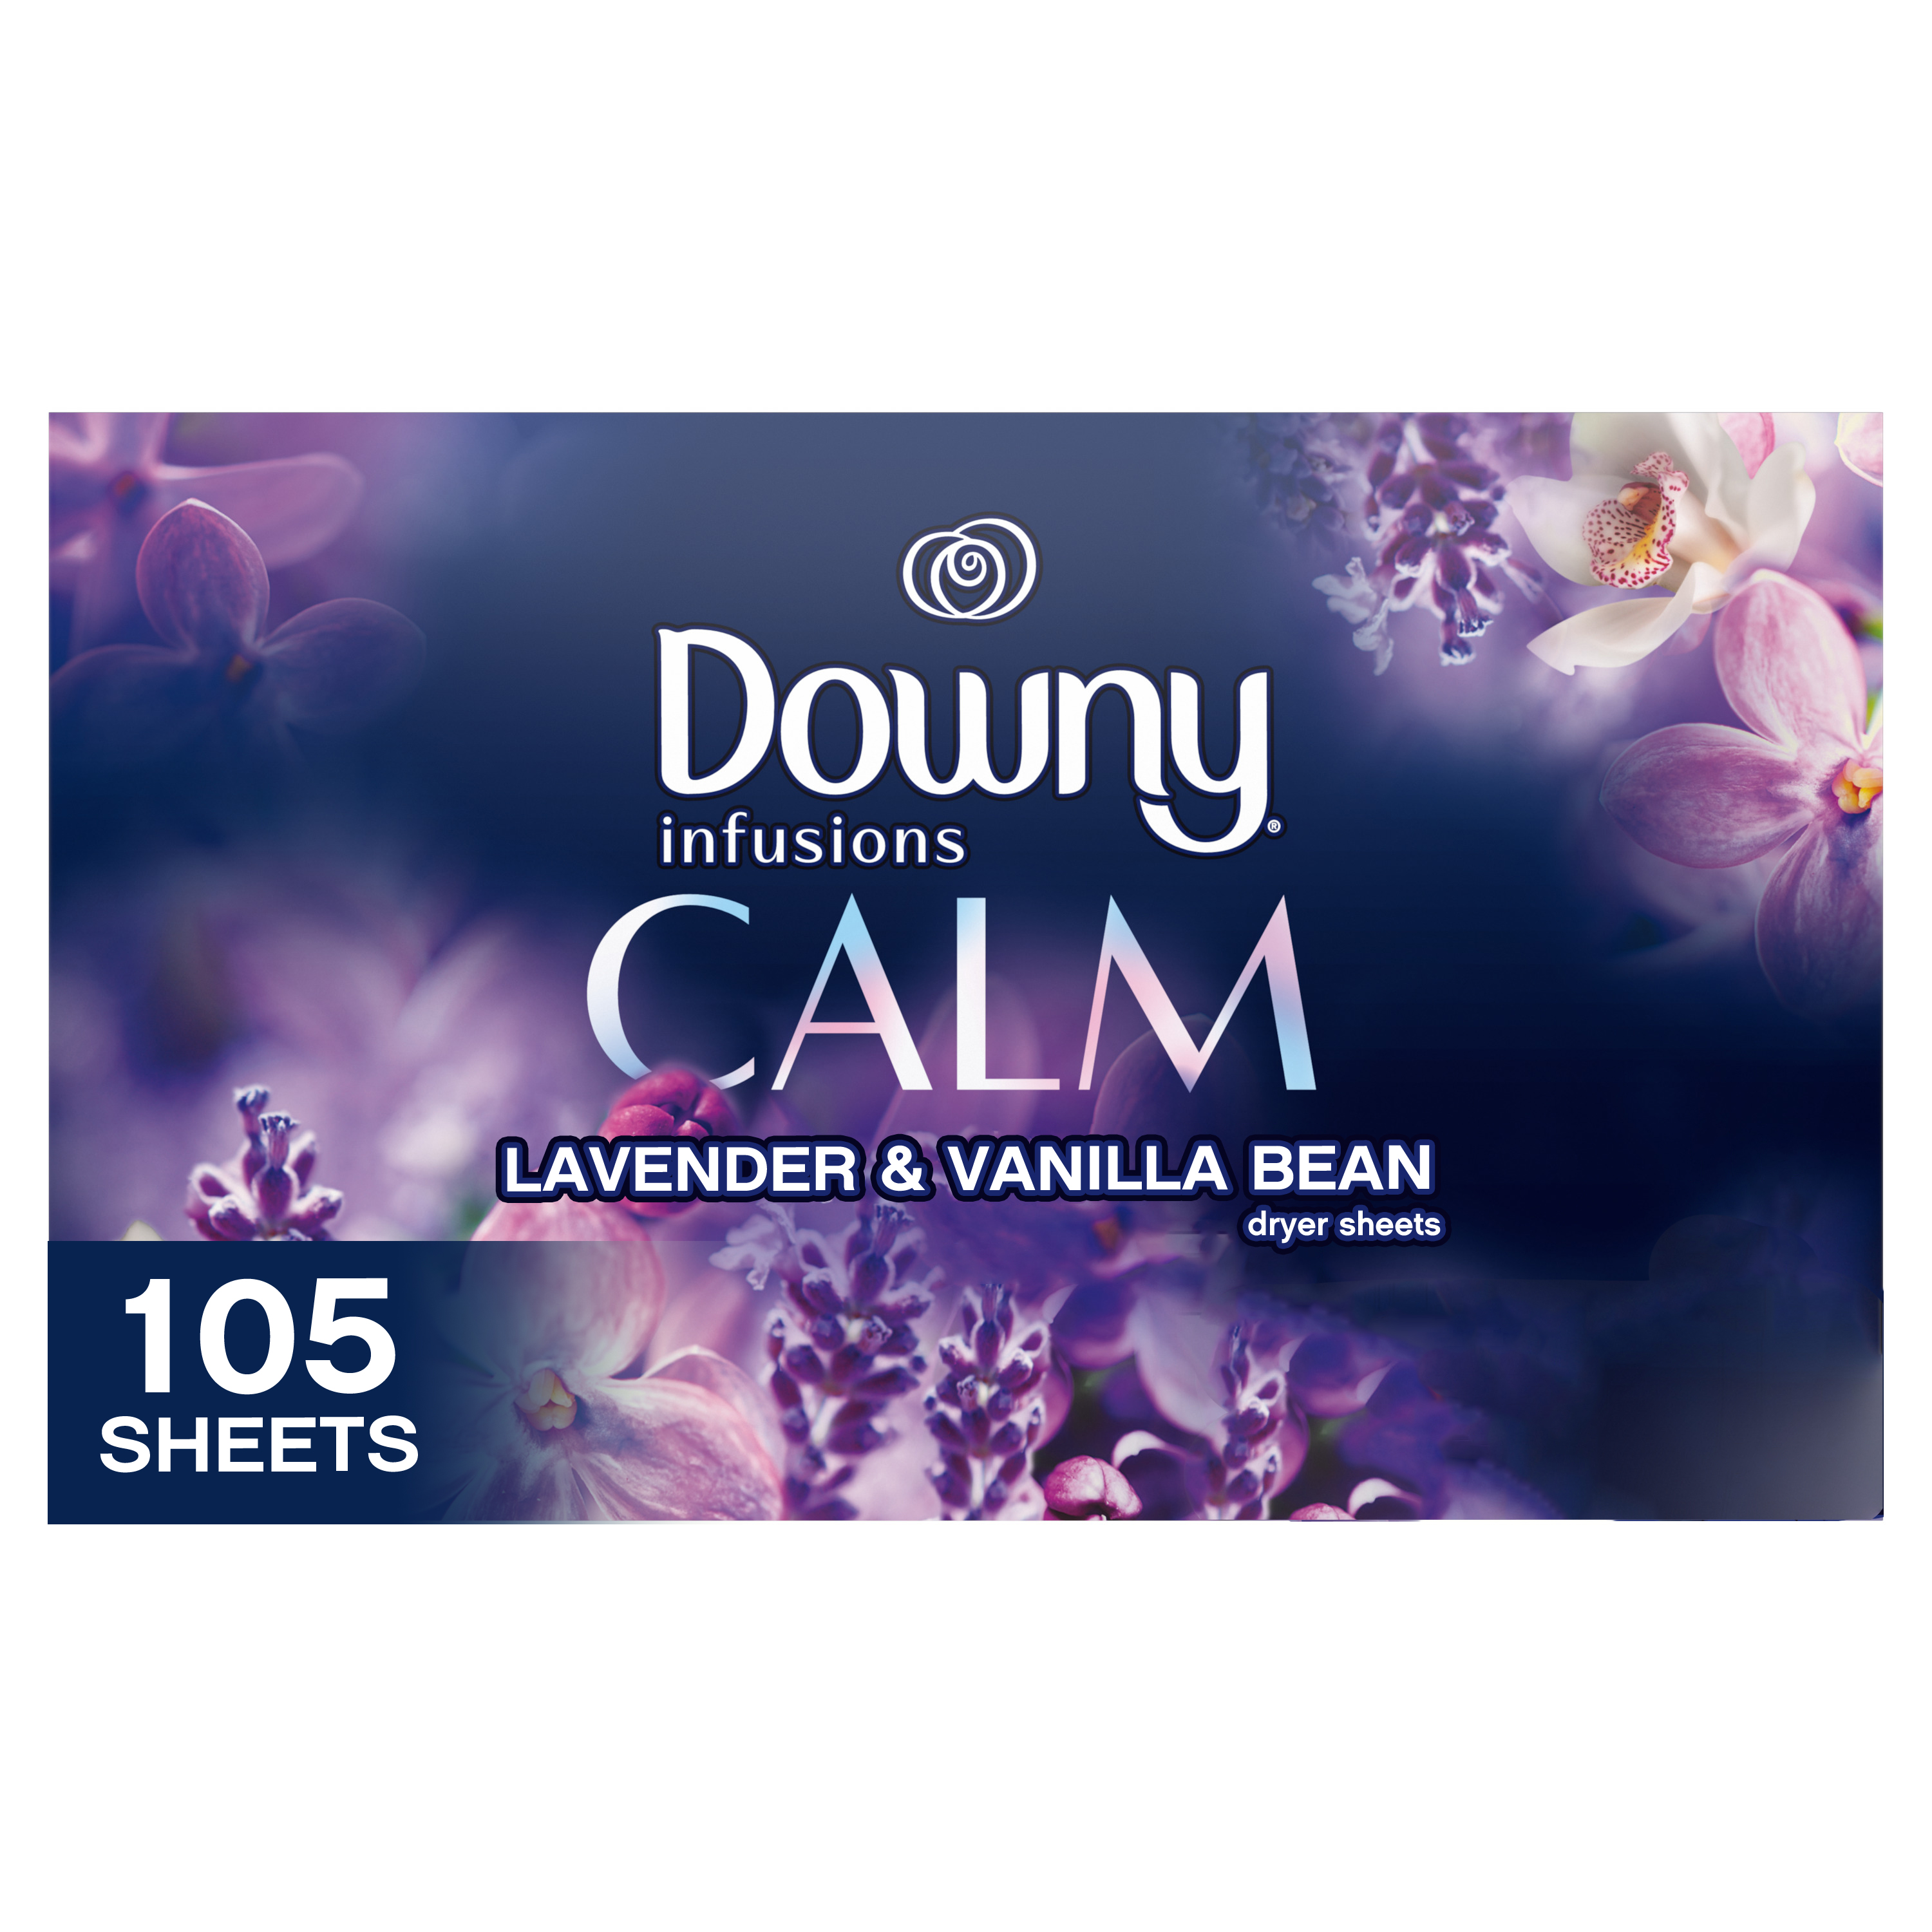 Downy Infusions Dryer Sheets, Calm, Lavender & Vanilla Bean, 105 ct - image 1 of 11